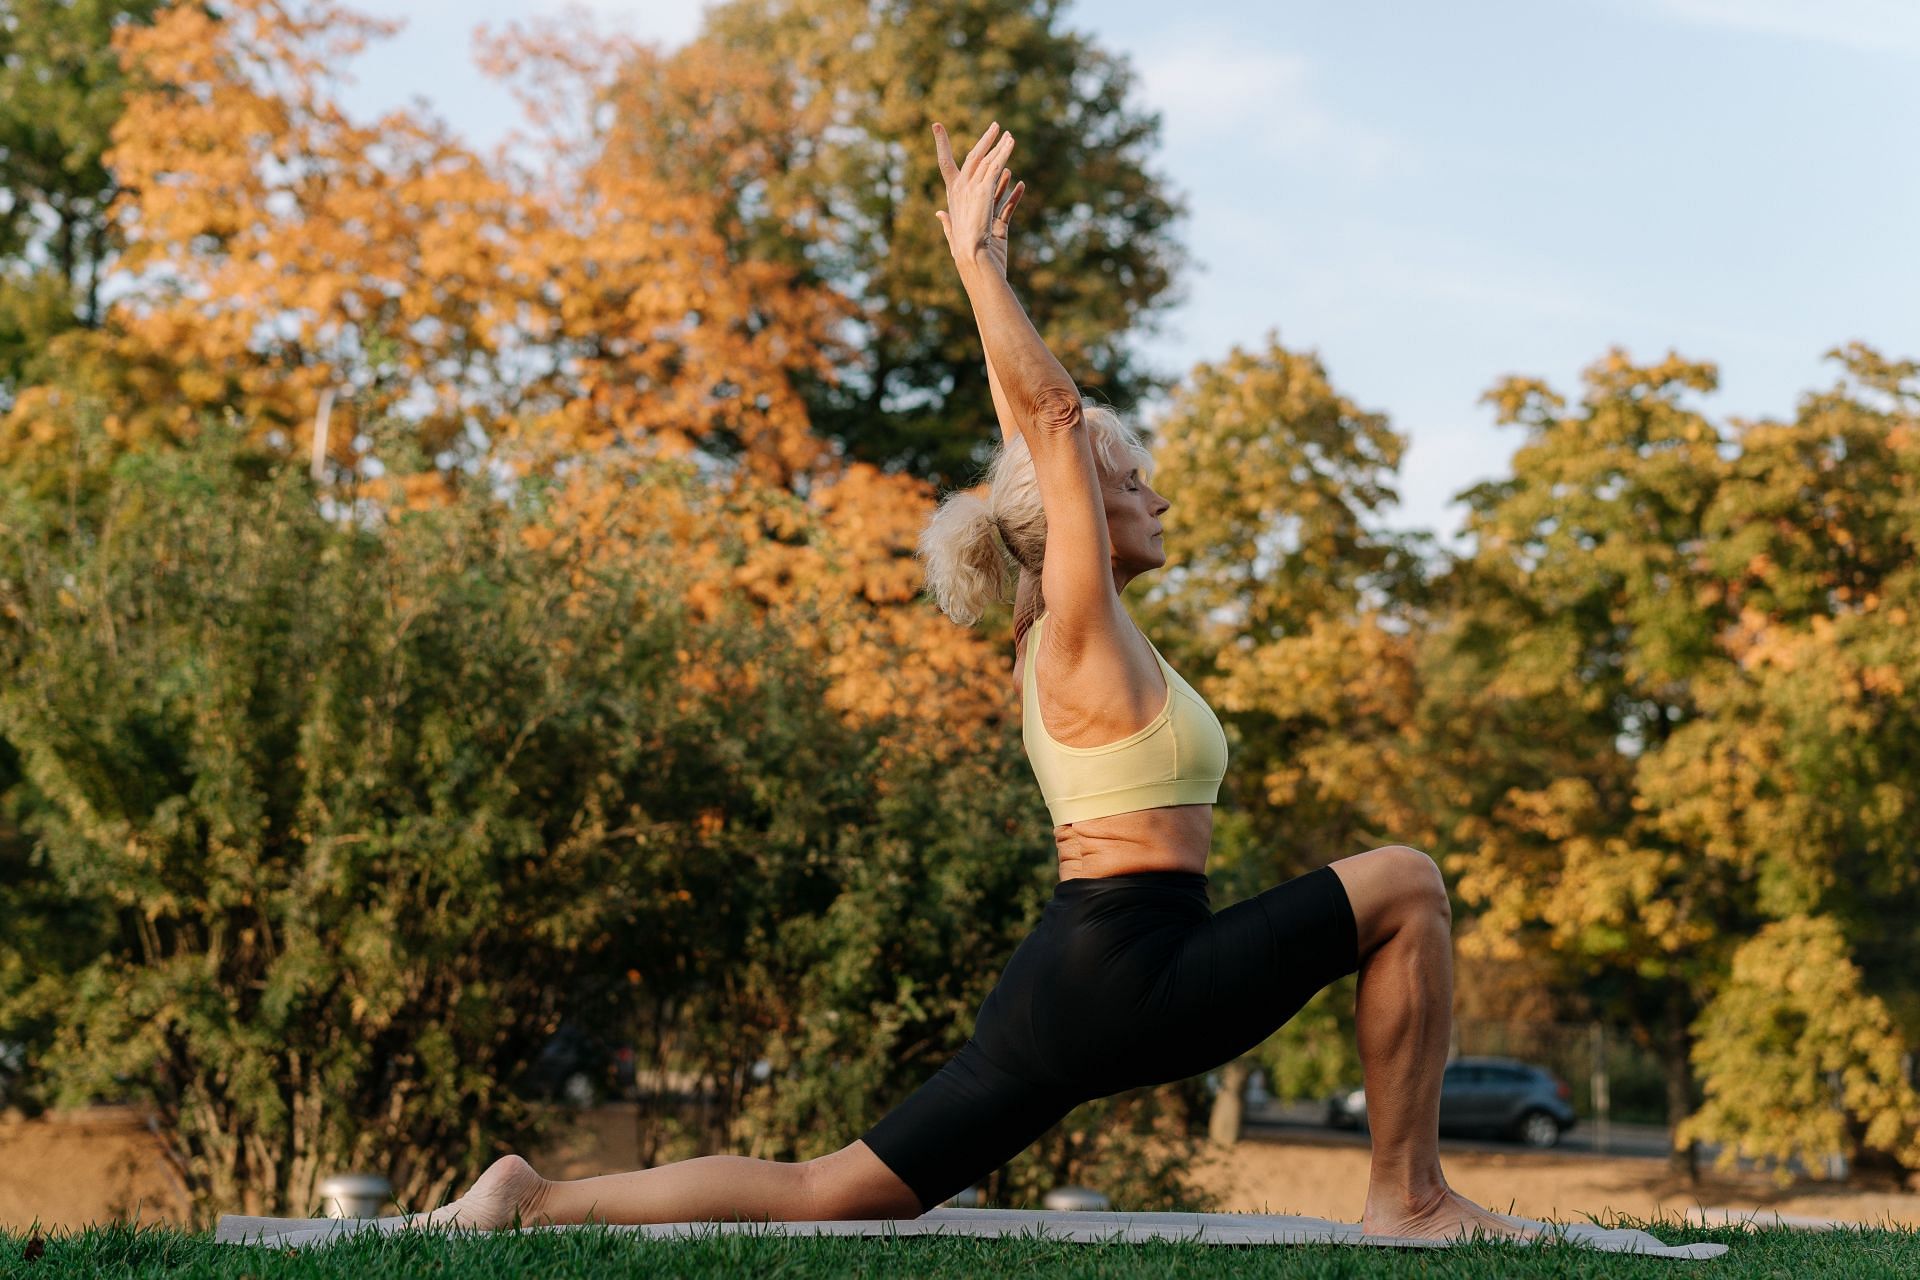 Hatha yoga is one of the most basic forms of yoga. (Image via Pexels/Cottonbro Studio)